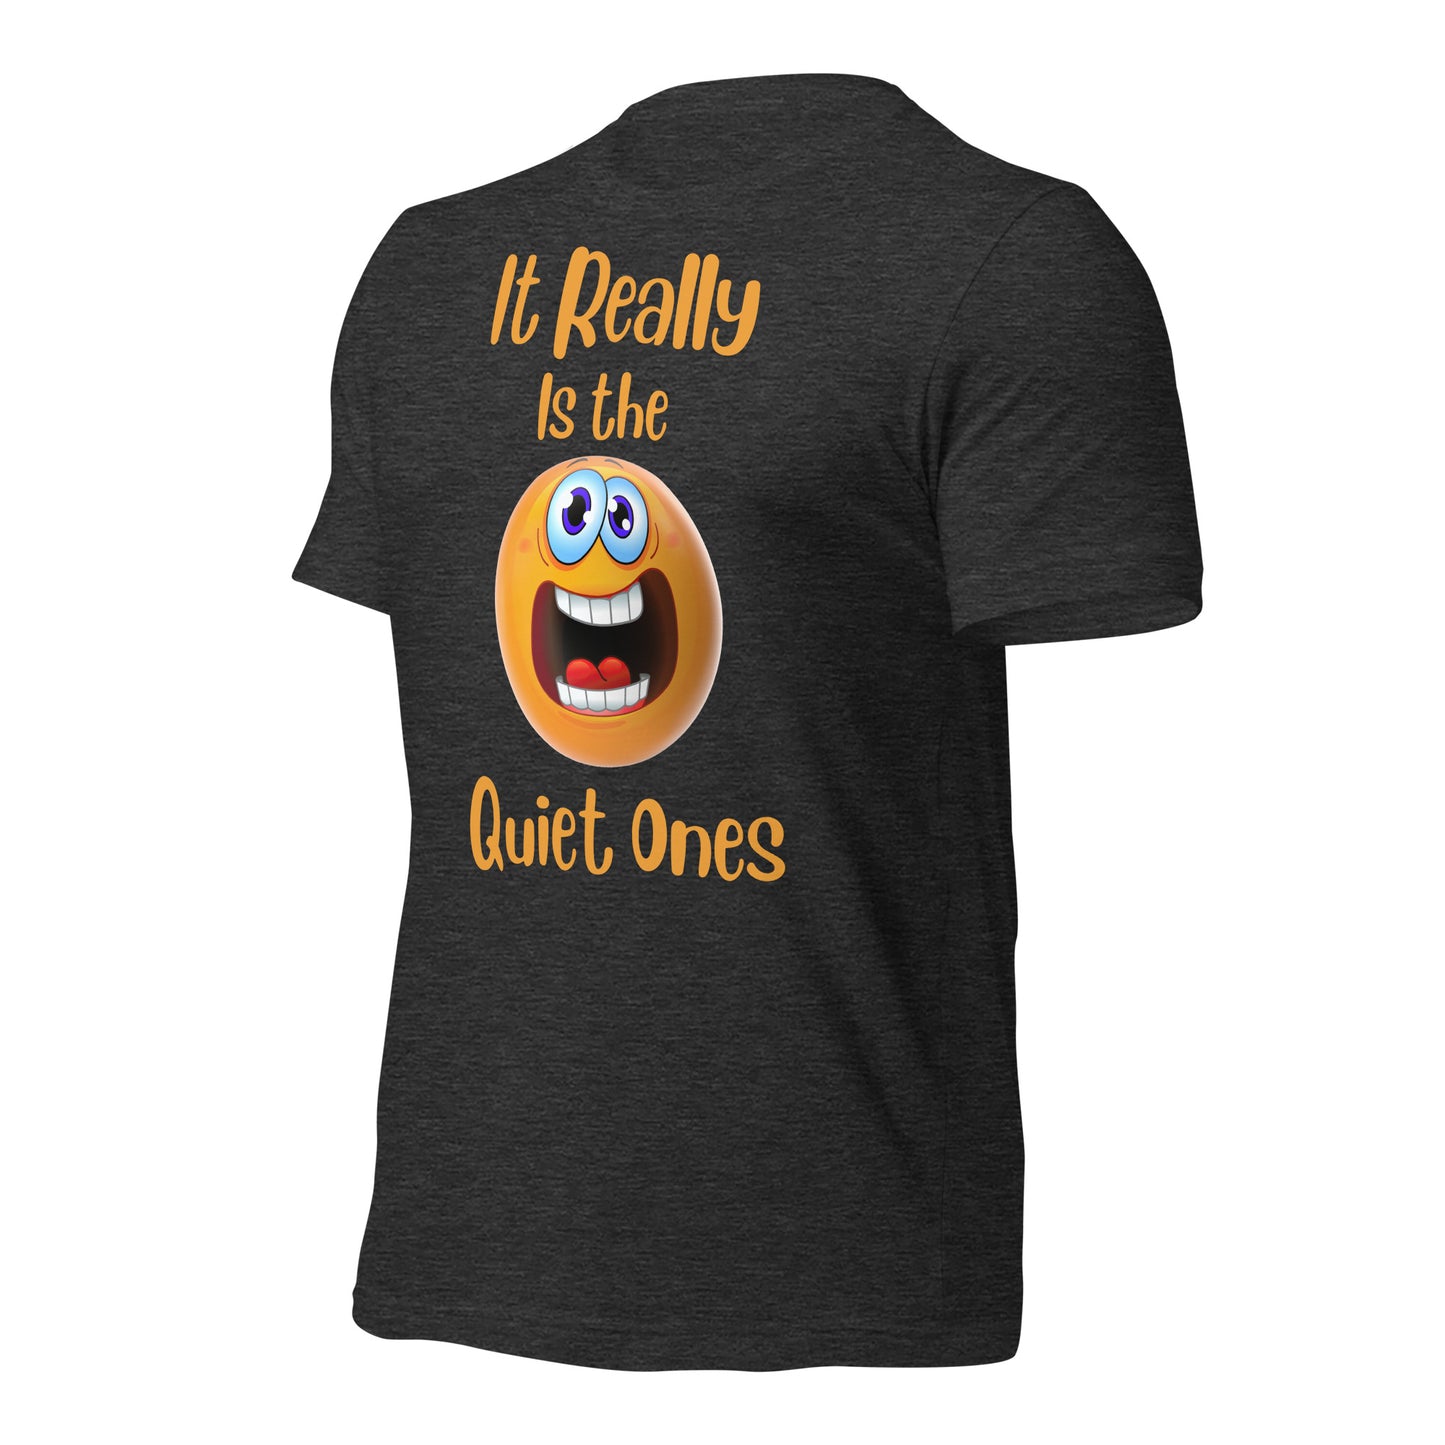 It Really is the Quiet Ones Quality Cotton Bella Canvas Adult T-Shirt